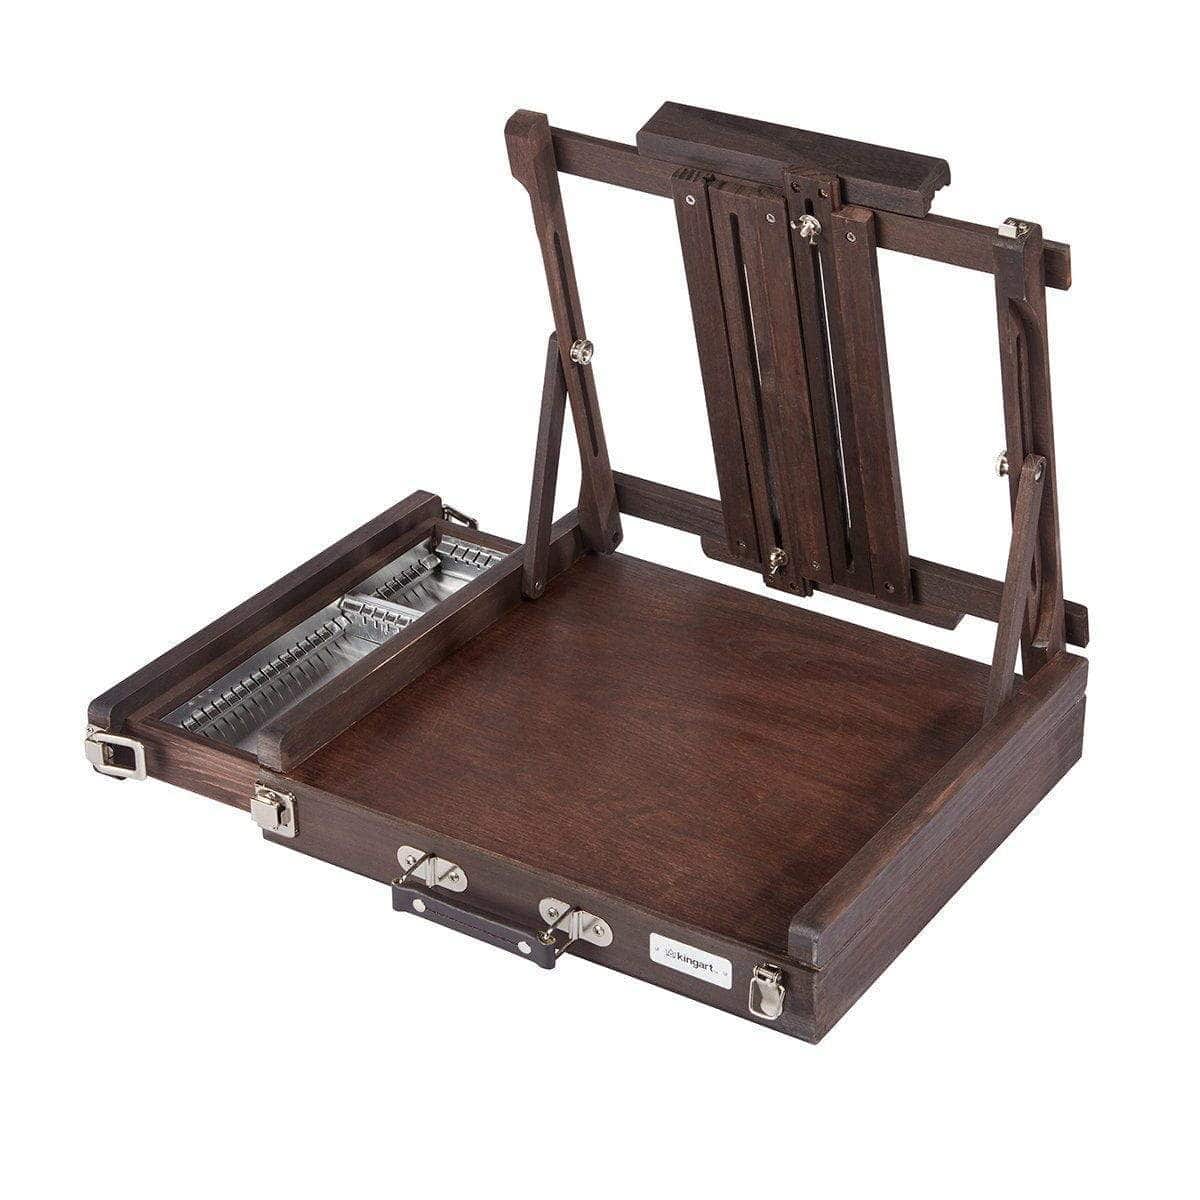 KINGART® Wooden Tabletop Easel with Metal-Lined Storage Drawer, Espresso  Finish